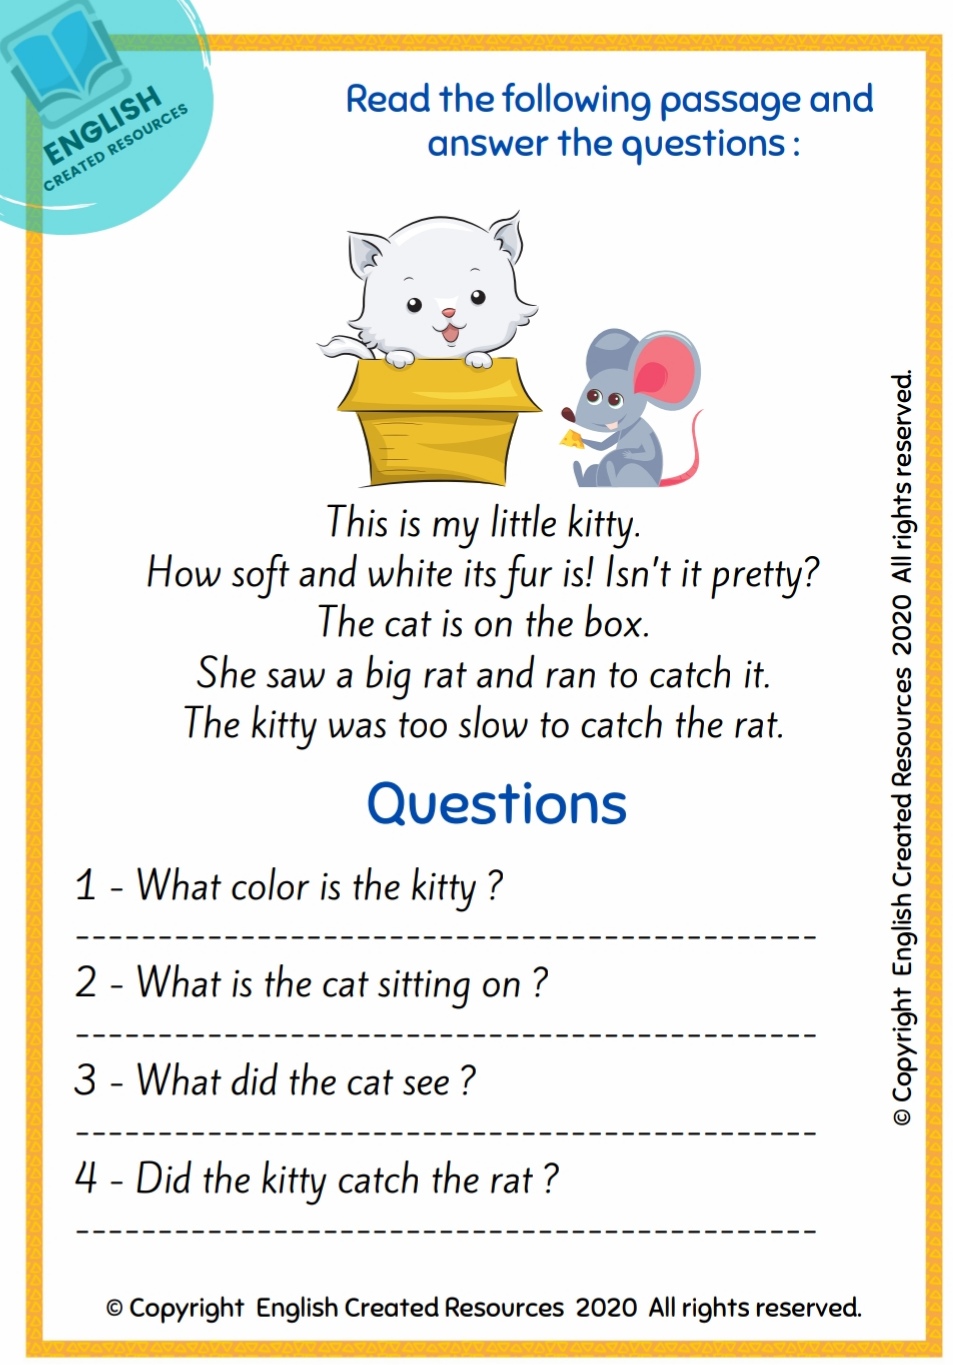 reading-comprehension-worksheets-grade-1-english-created-resources